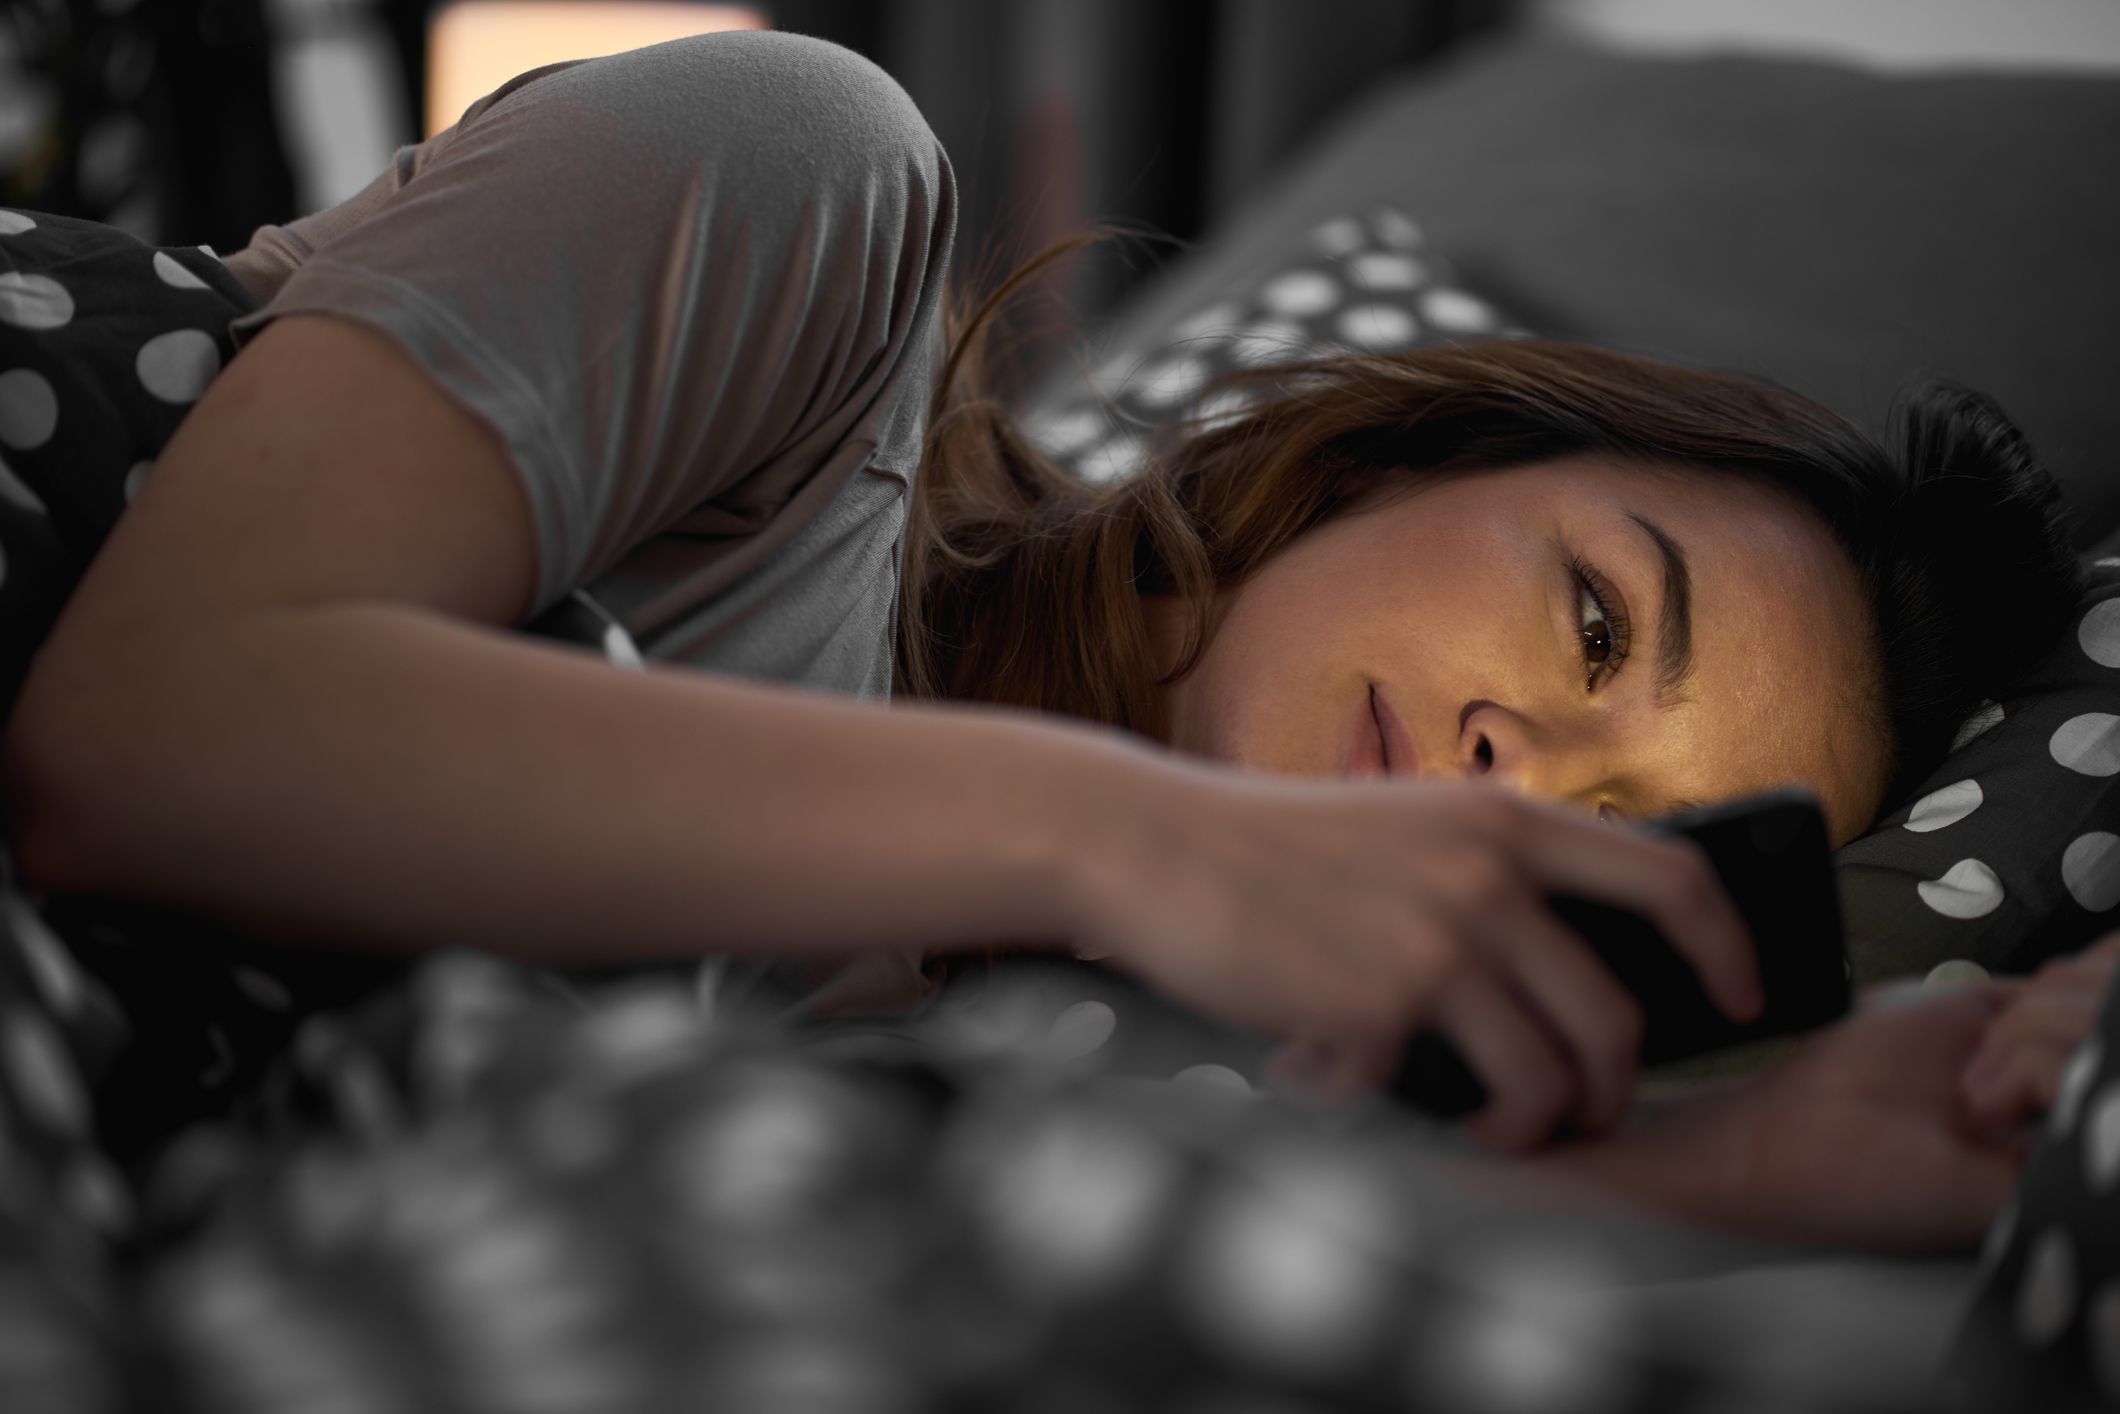 Teenager using a phone while lying in bed